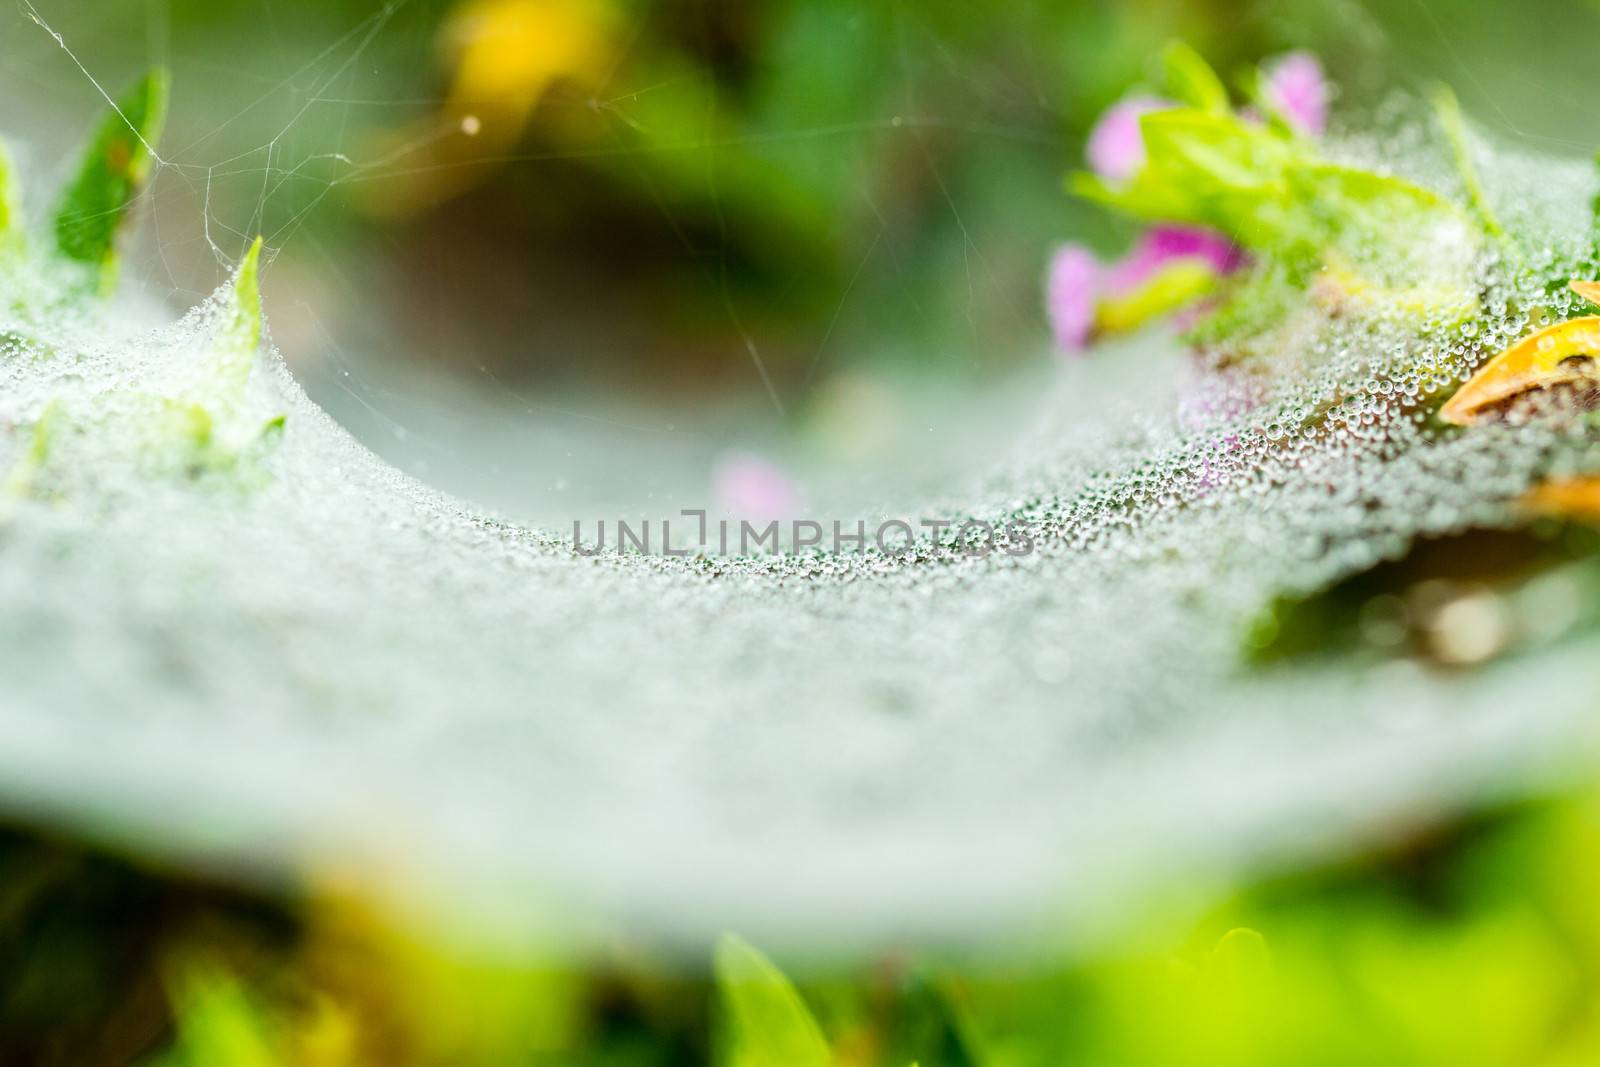 Dewdrop and spider web by azamshah72